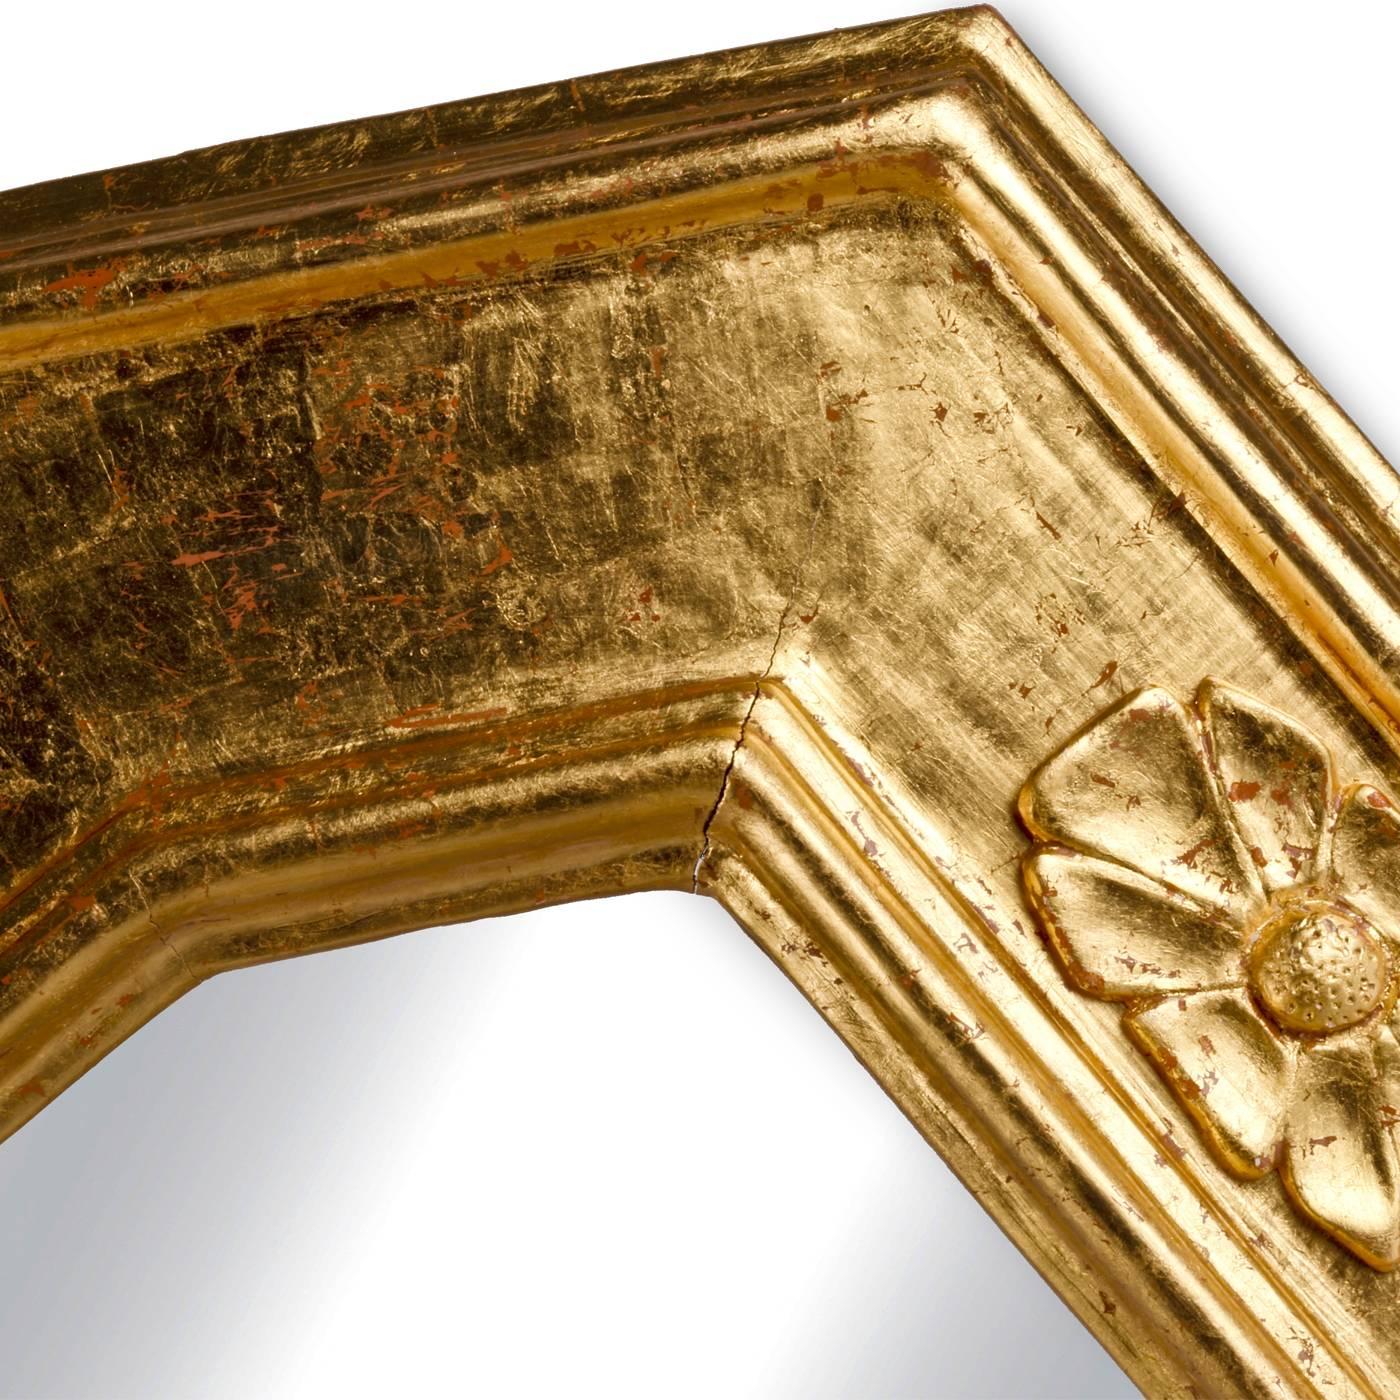 This sophisticated mirror features a design that is classic and elegant and dates back to the 16th century. Traditional methods were used in hand crafting it and the precious addition of pure gold leaf that covers it makes this piece a true objet